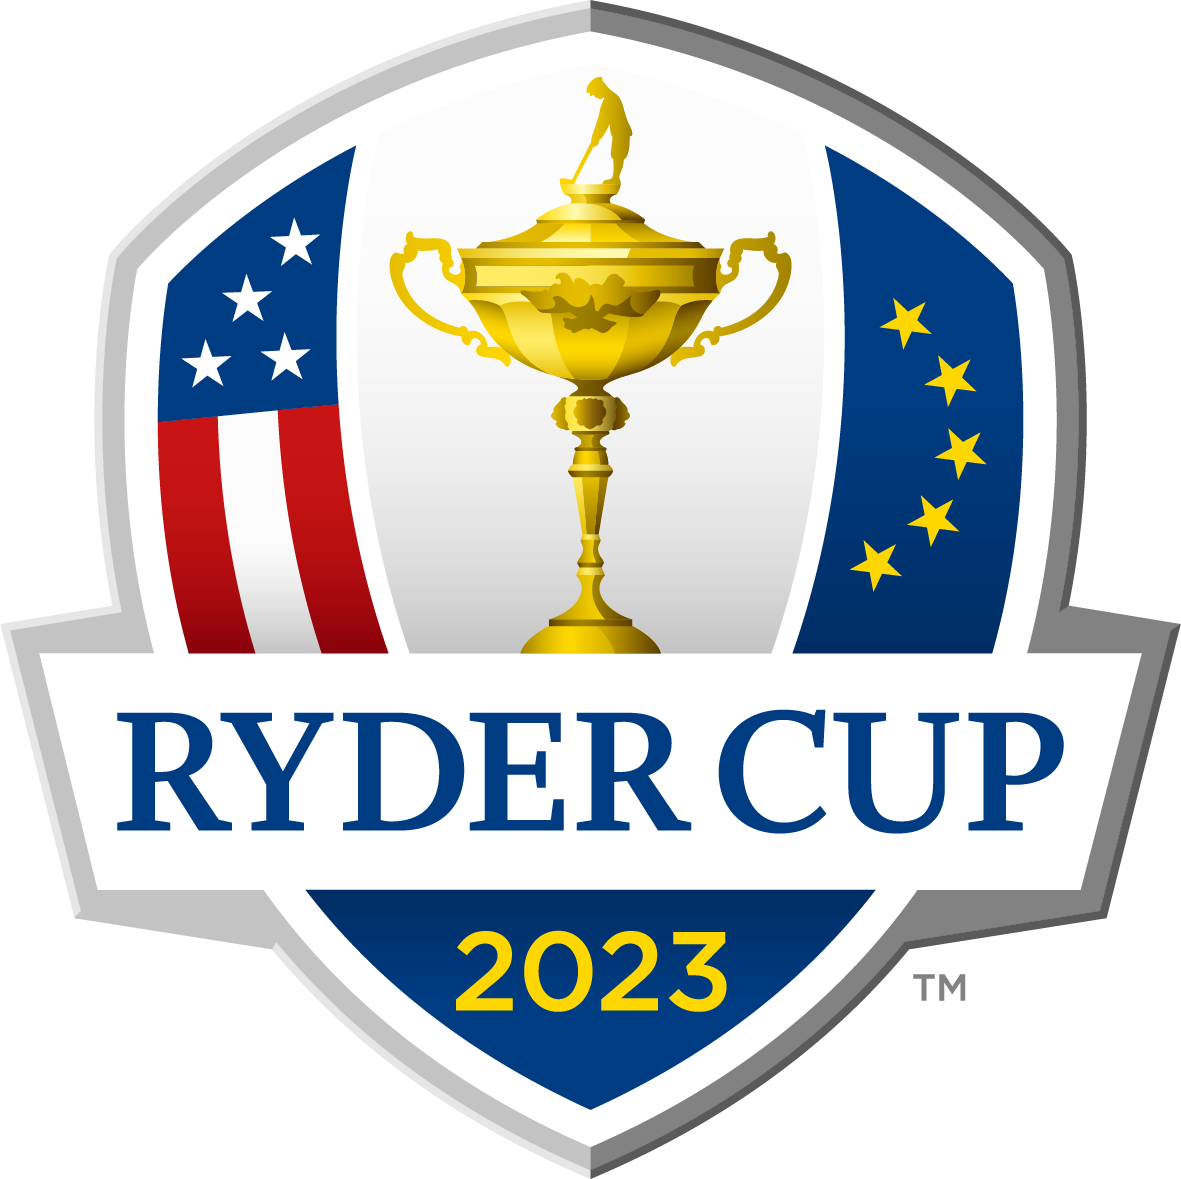 Download Ryder Cup 2023 Logo PNG and Vector (PDF, SVG, Ai, EPS) Free